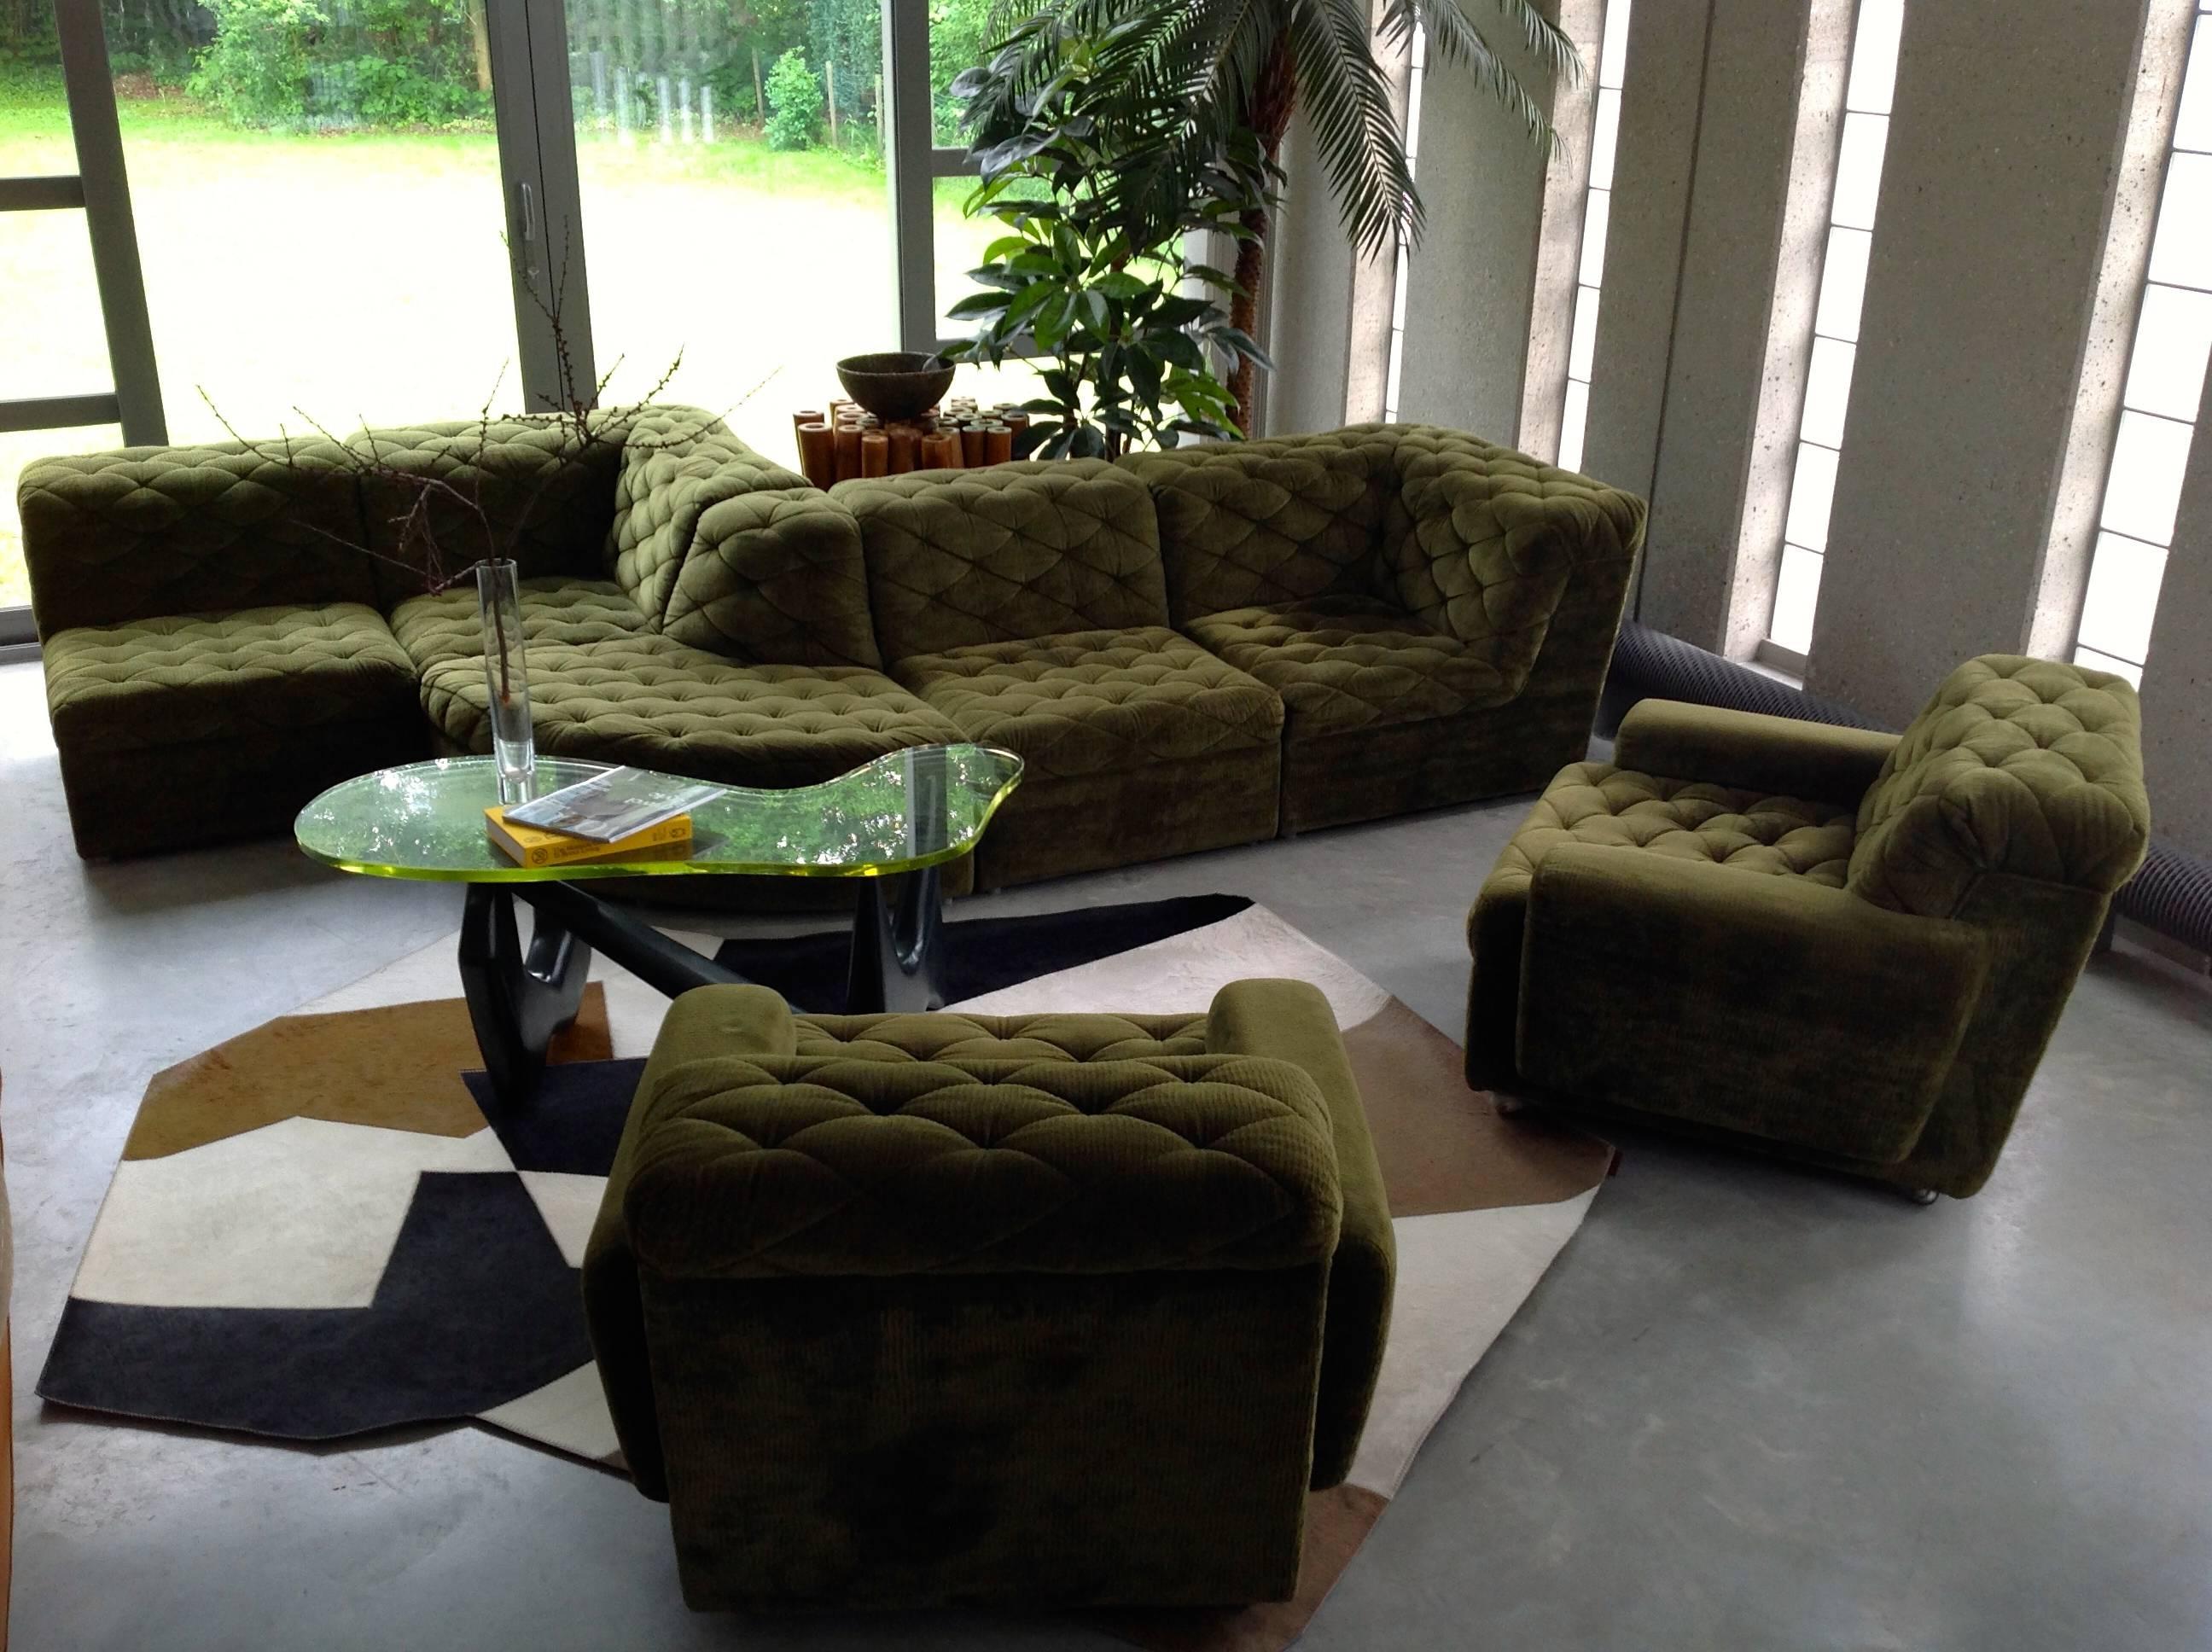 Exceptionally beautiful condition, upholstery is amazing, very nice color, grass green velvet in very good original condition.
Photo's do not give the real color.
Pure class this ensemble is actually nicer than on the pictures.
Can be placed in